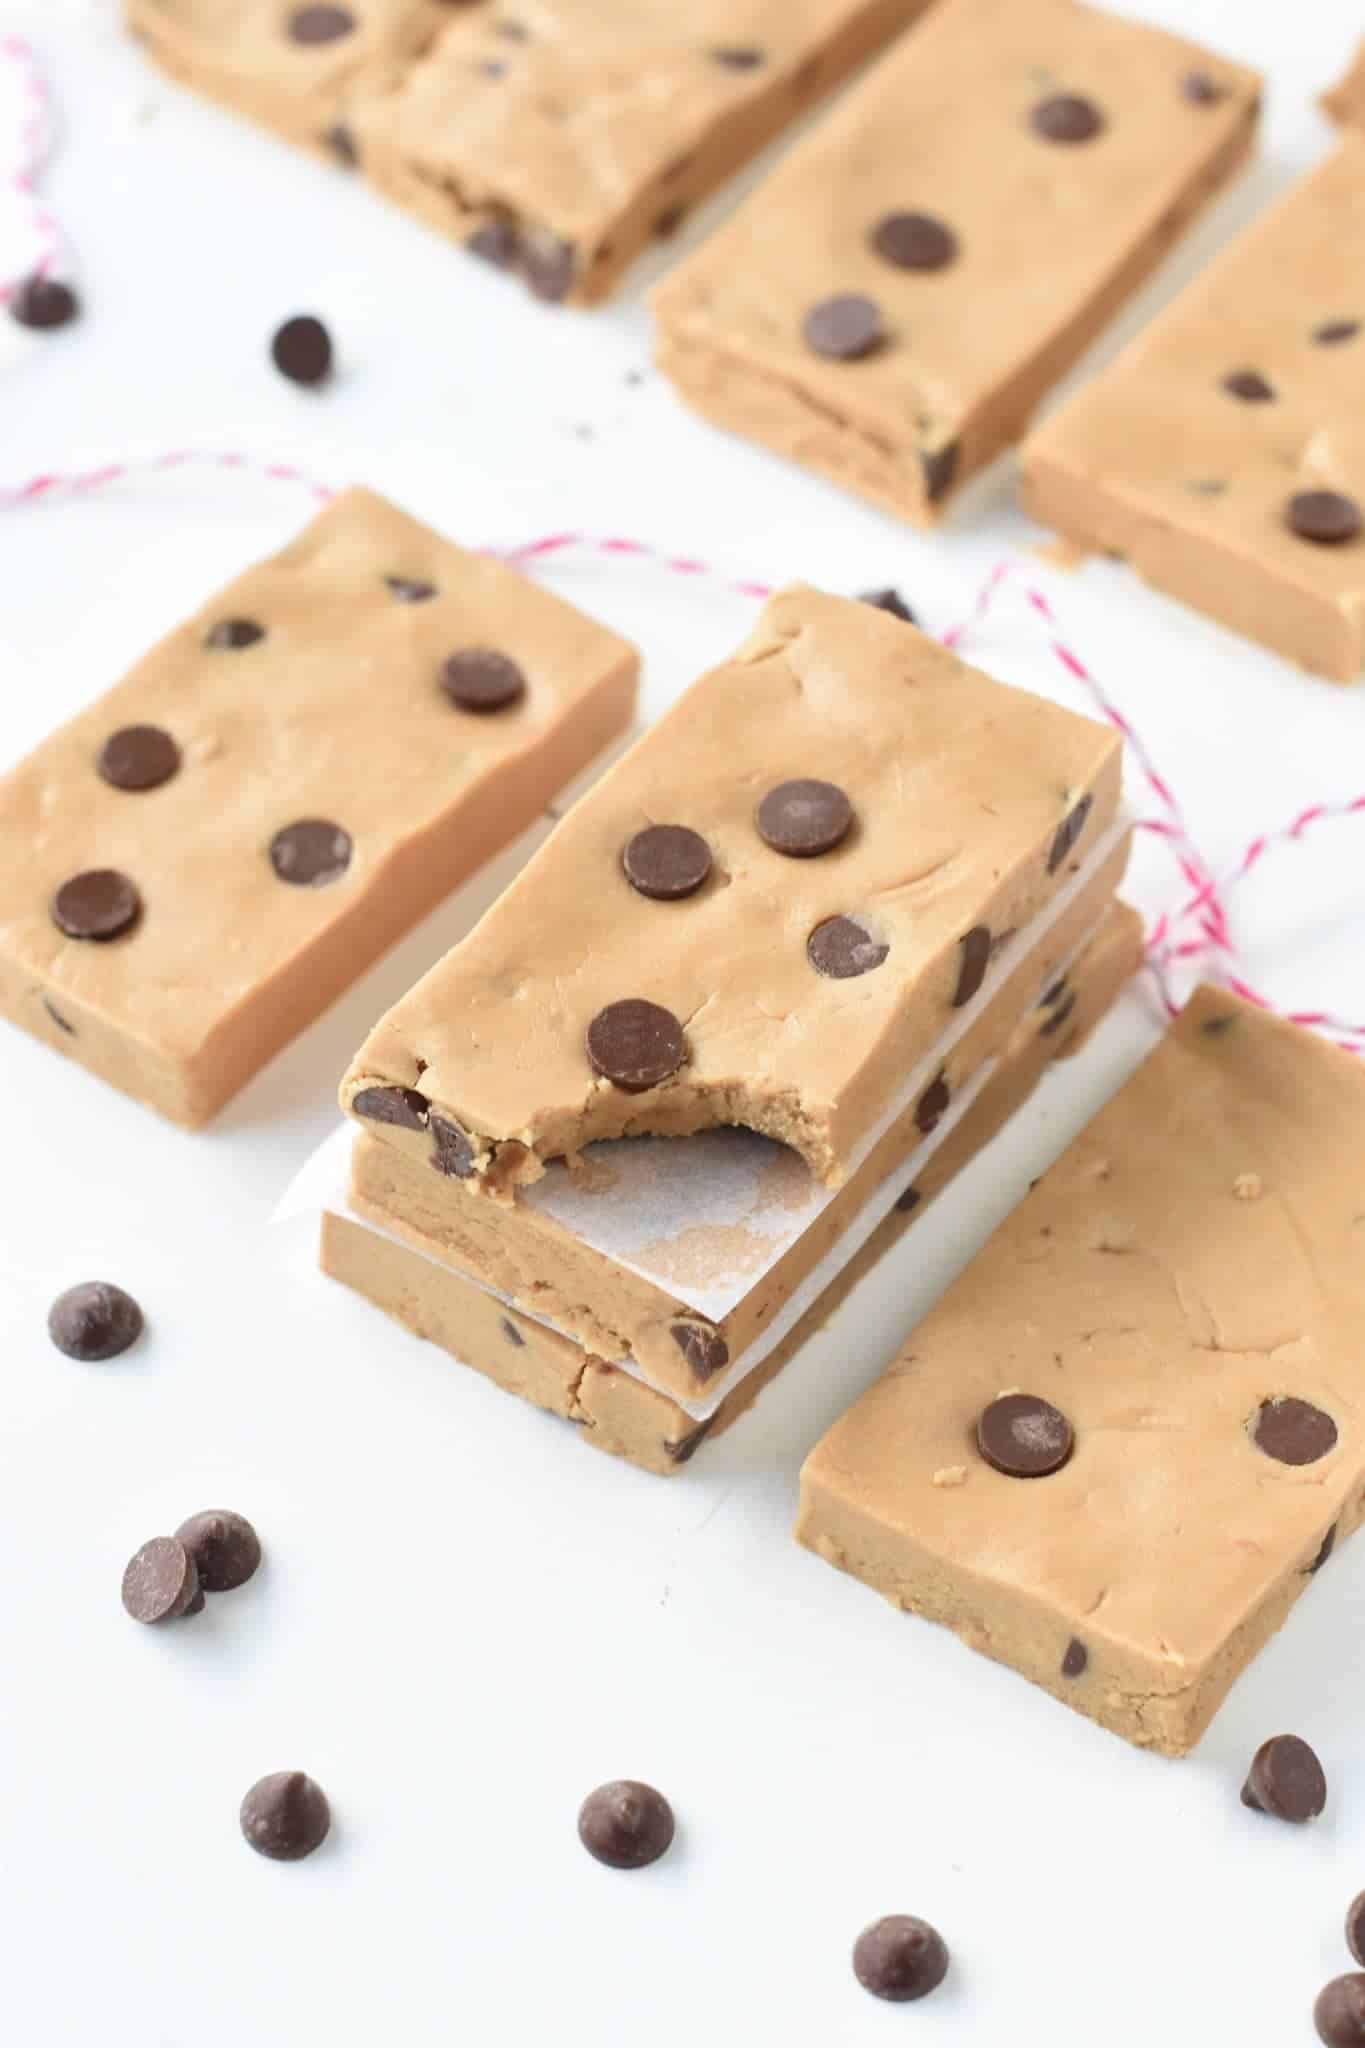 Vegan Perfect Bar - No-bake Protein Bars with Pea Protein Powder